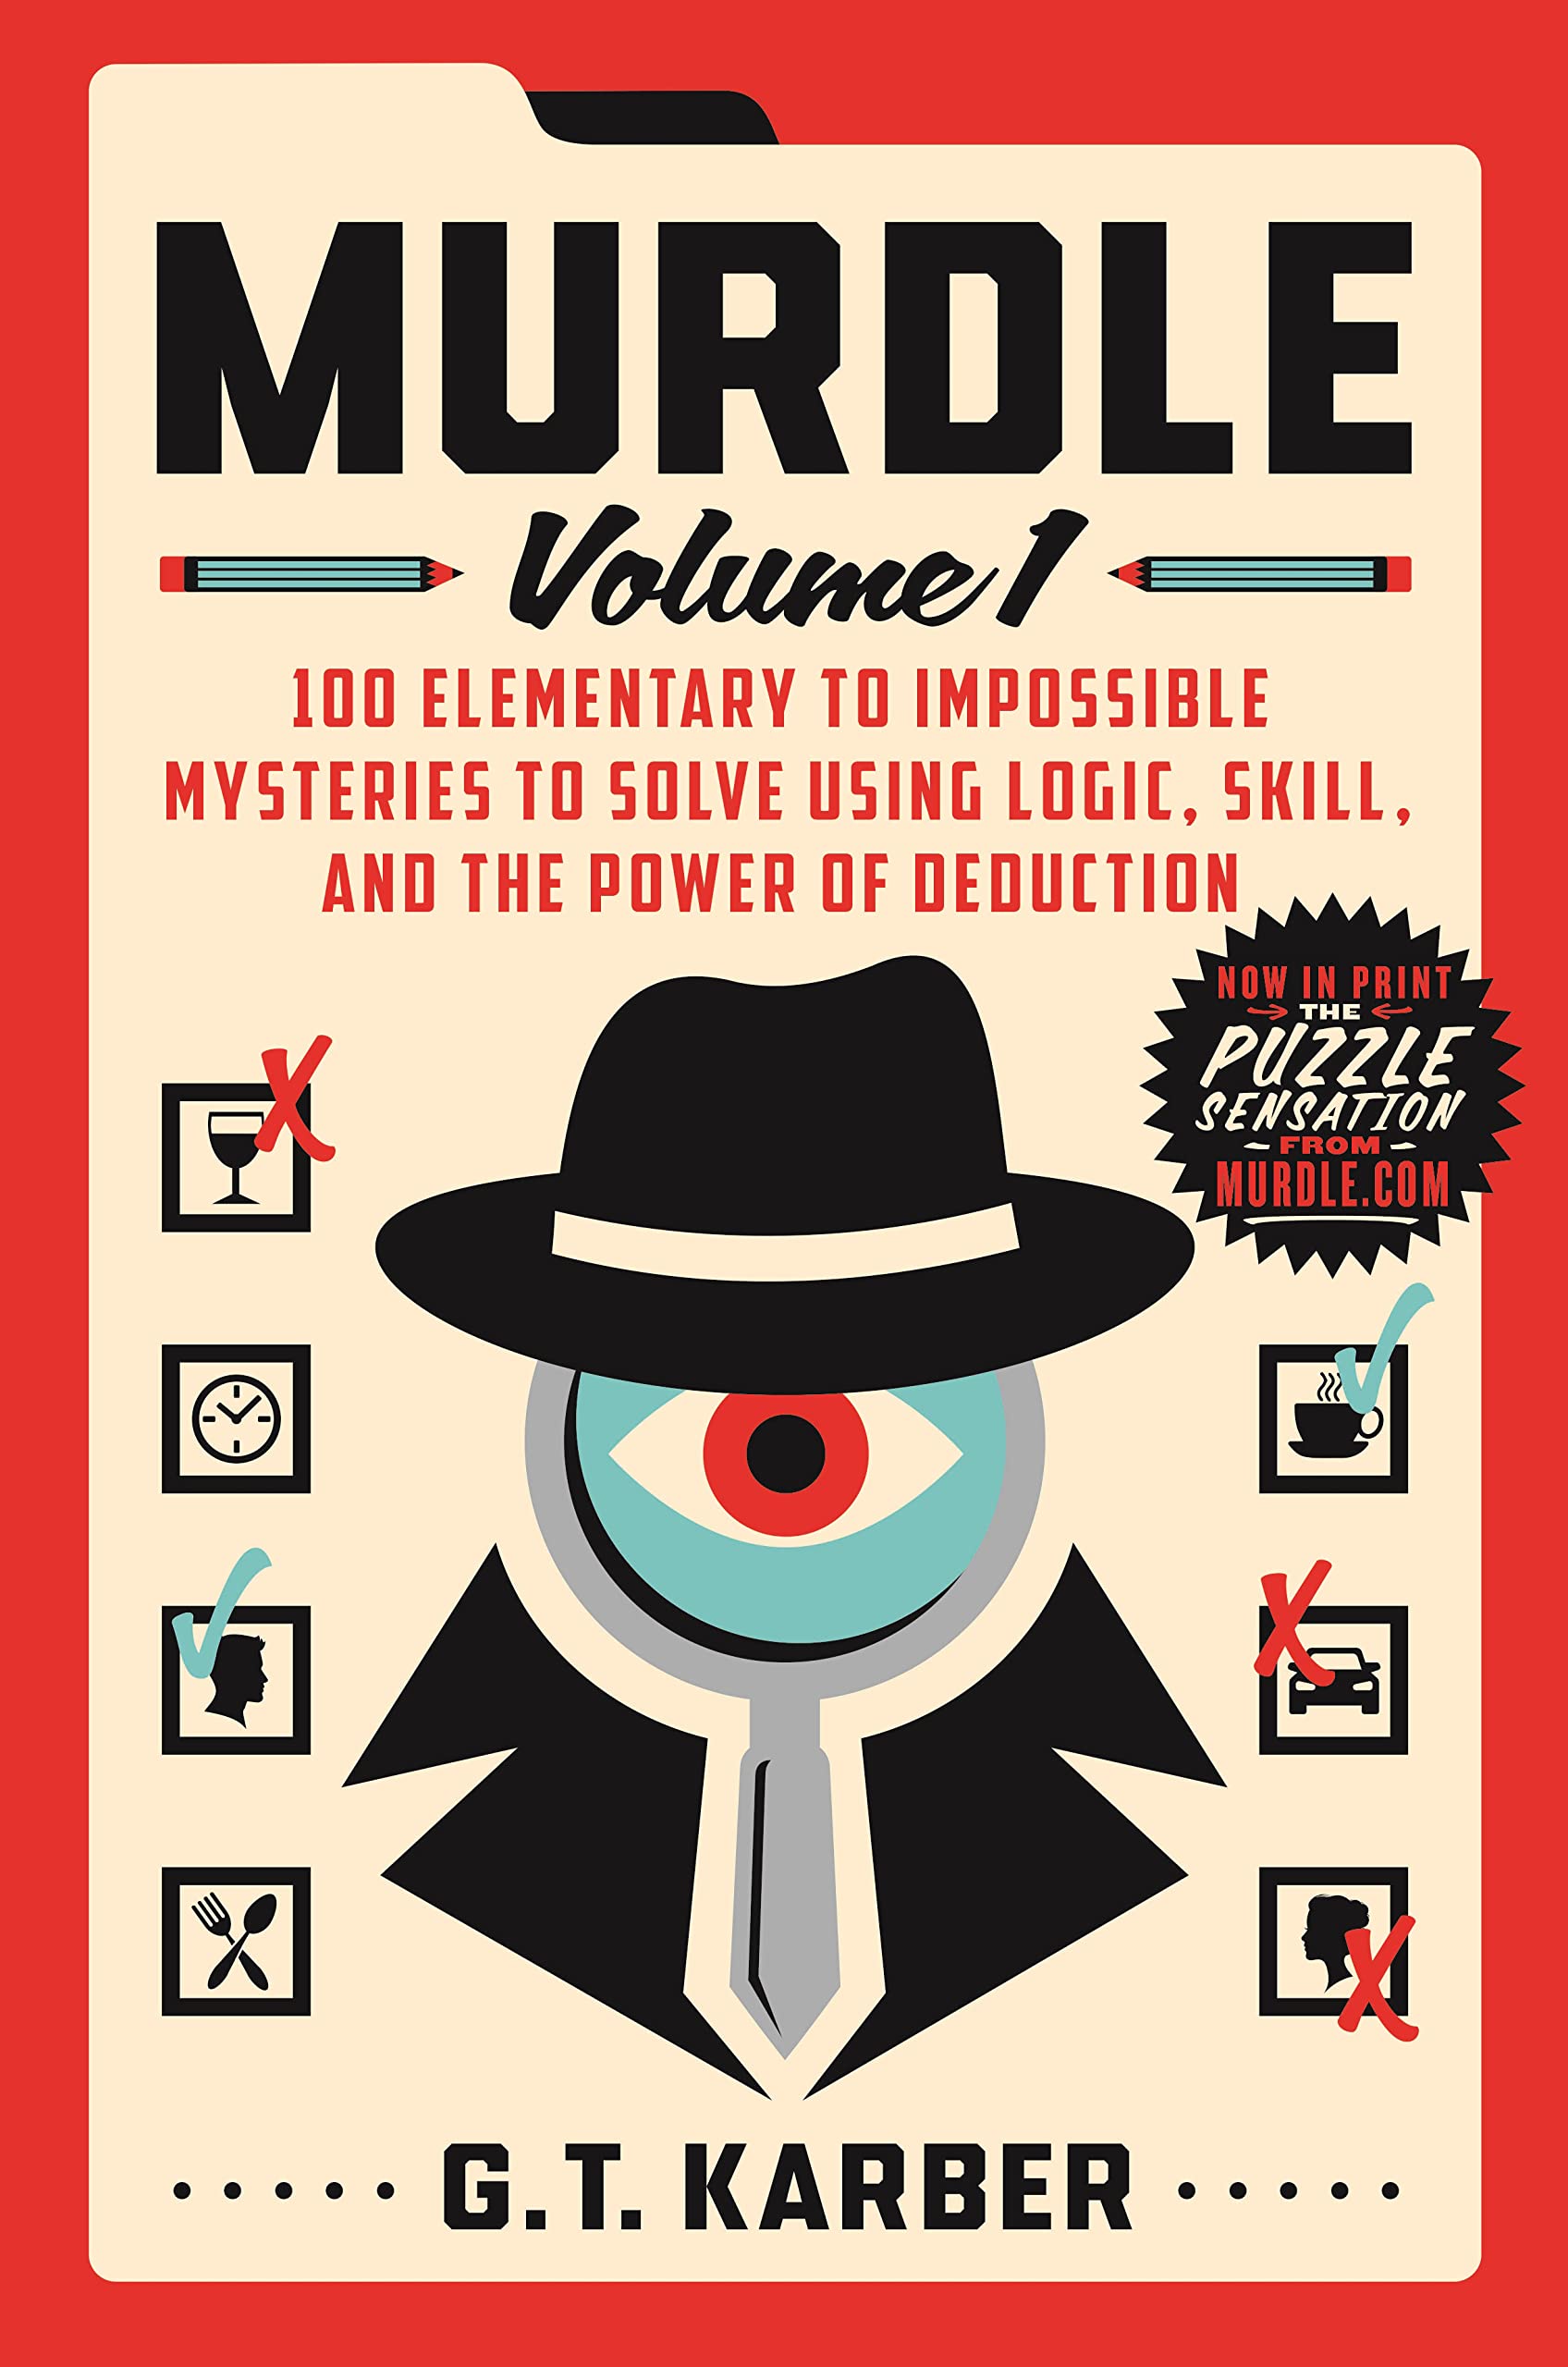 Murdle Volume 1 by G.T. Karber